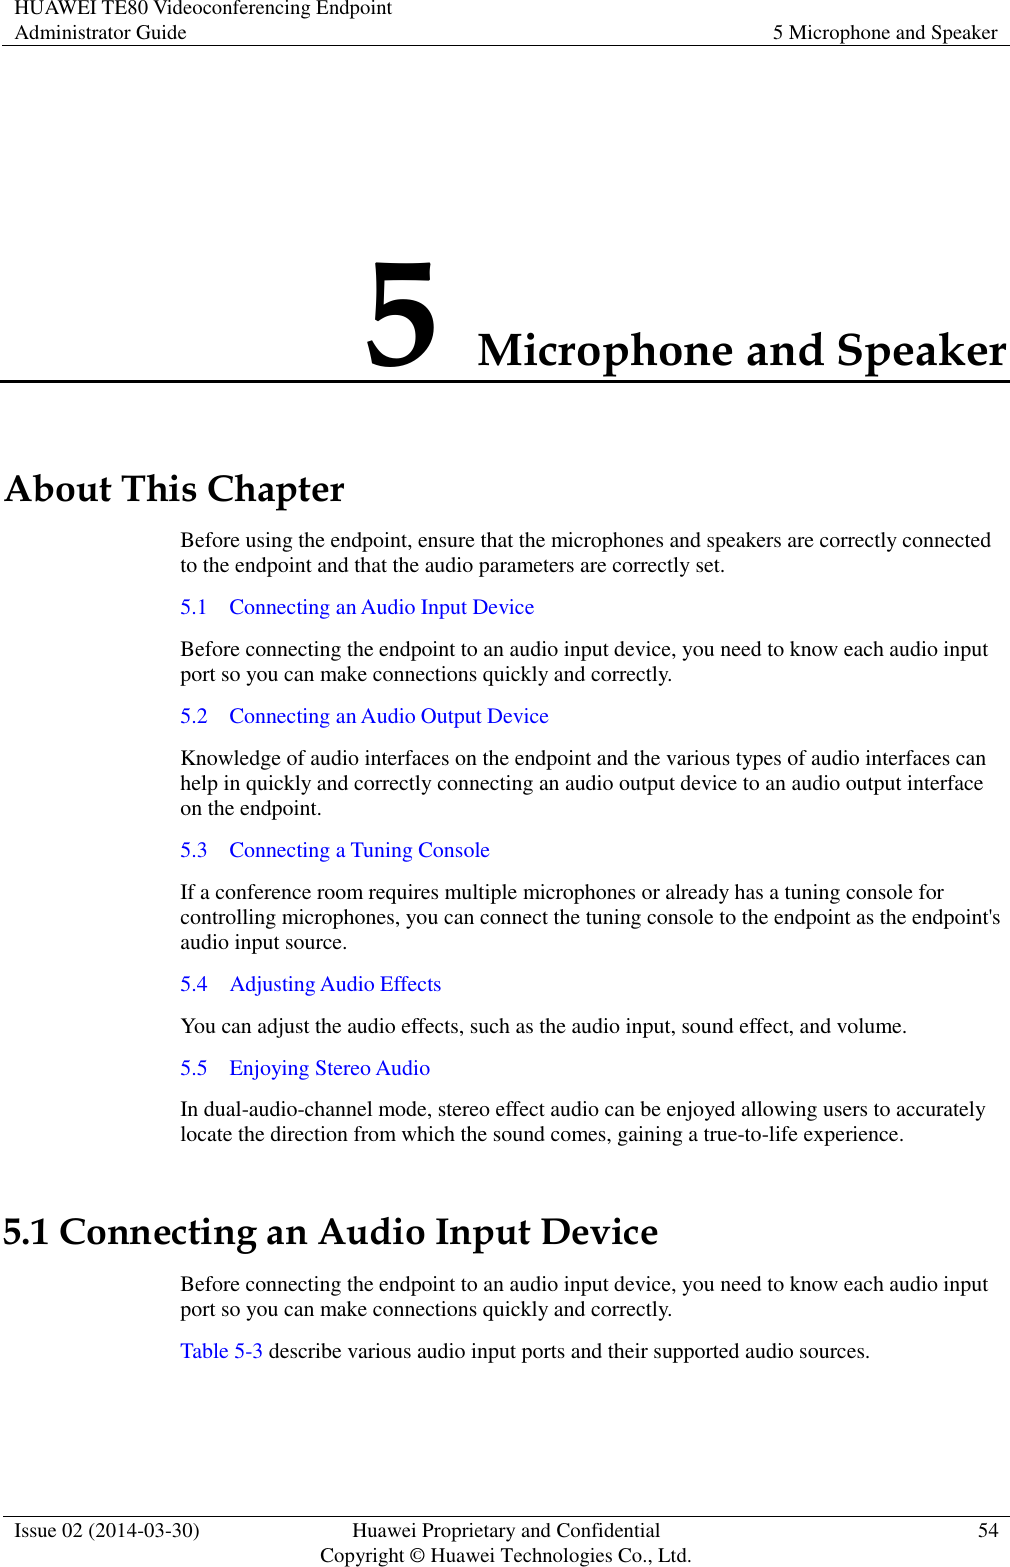 HUAWEI TE80 Videoconferencing Endpoint Administrator Guide 5 Microphone and Speaker  Issue 02 (2014-03-30) Huawei Proprietary and Confidential Copyright © Huawei Technologies Co., Ltd. 54  5 Microphone and Speaker About This Chapter Before using the endpoint, ensure that the microphones and speakers are correctly connected to the endpoint and that the audio parameters are correctly set.   5.1    Connecting an Audio Input Device Before connecting the endpoint to an audio input device, you need to know each audio input port so you can make connections quickly and correctly. 5.2    Connecting an Audio Output Device Knowledge of audio interfaces on the endpoint and the various types of audio interfaces can help in quickly and correctly connecting an audio output device to an audio output interface on the endpoint. 5.3    Connecting a Tuning Console If a conference room requires multiple microphones or already has a tuning console for controlling microphones, you can connect the tuning console to the endpoint as the endpoint&apos;s audio input source. 5.4    Adjusting Audio Effects You can adjust the audio effects, such as the audio input, sound effect, and volume. 5.5    Enjoying Stereo Audio In dual-audio-channel mode, stereo effect audio can be enjoyed allowing users to accurately locate the direction from which the sound comes, gaining a true-to-life experience.   5.1 Connecting an Audio Input Device Before connecting the endpoint to an audio input device, you need to know each audio input port so you can make connections quickly and correctly. Table 5-3 describe various audio input ports and their supported audio sources. 